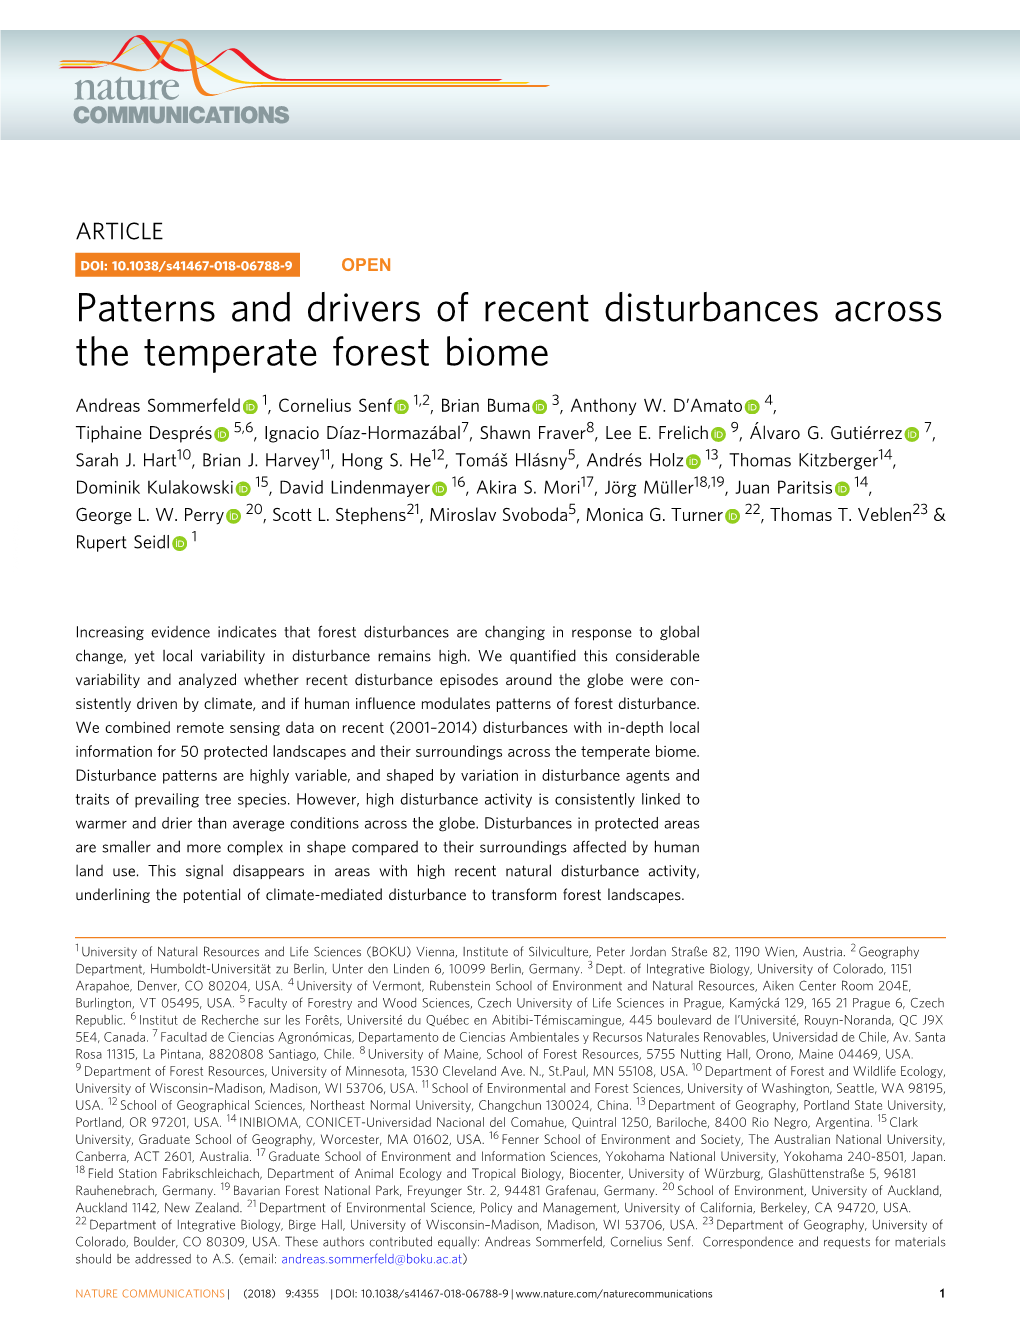 Patterns and Drivers of Recent Disturbances Across the Temperate Forest Biome